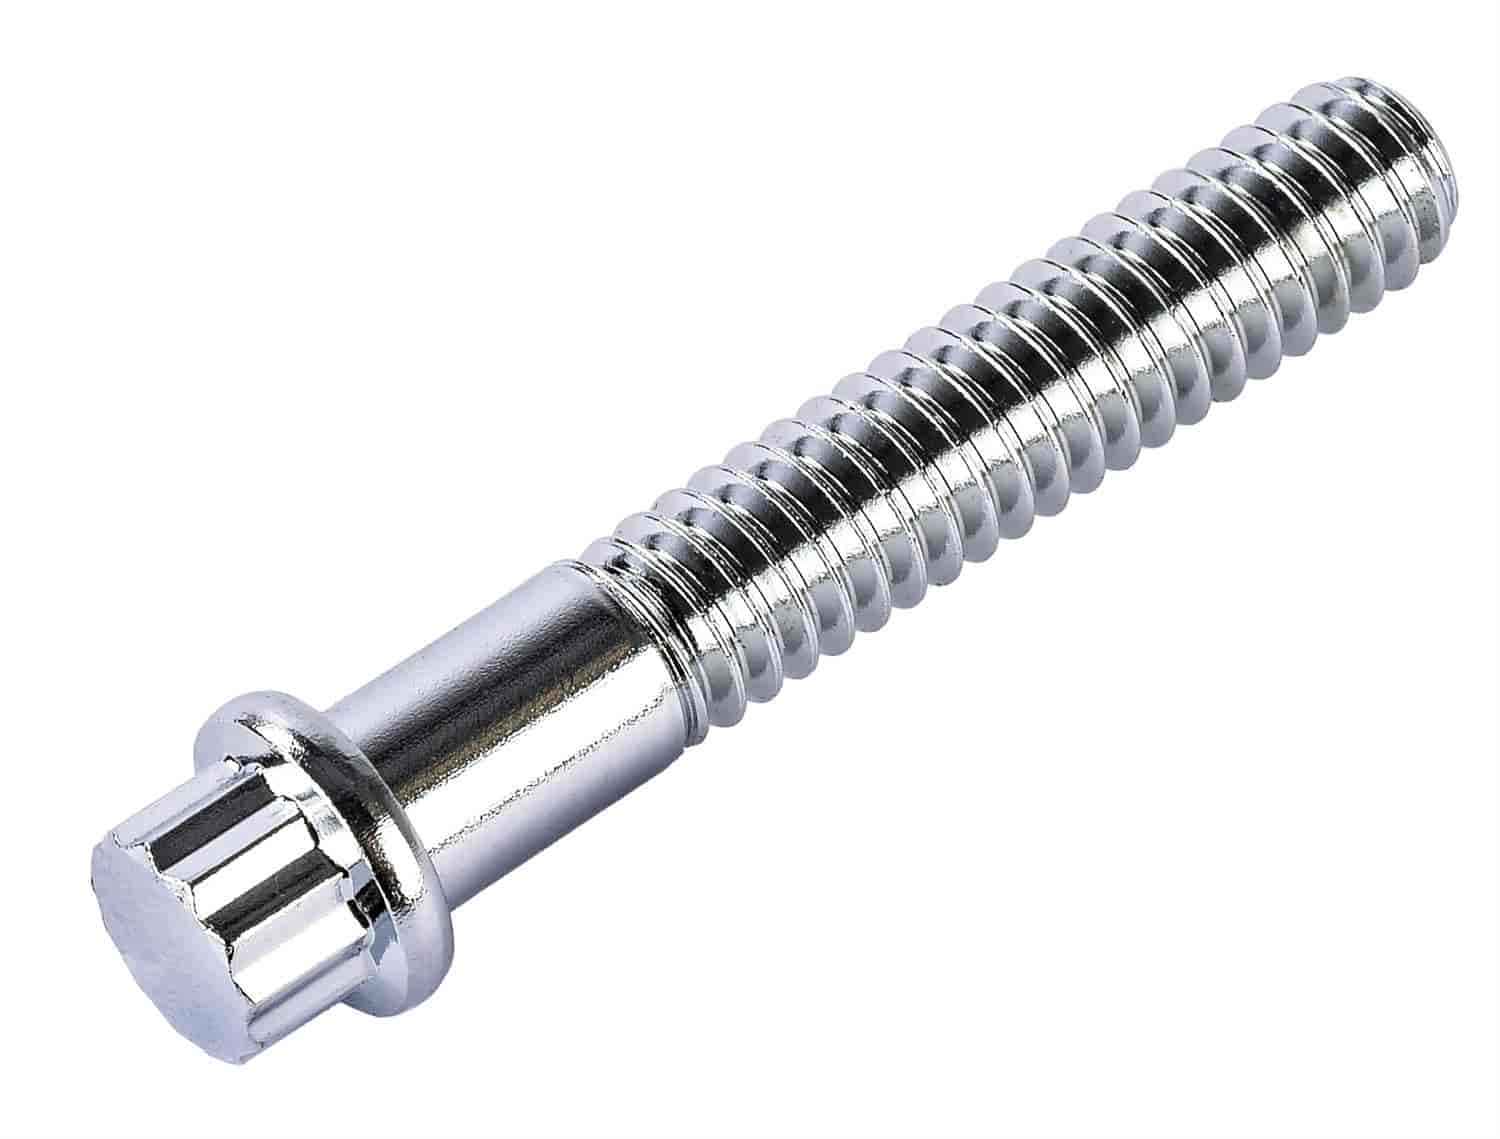 12 Point Fastener [1/4 in. -20 Thread x 1 1/2 (.500) in. Length]